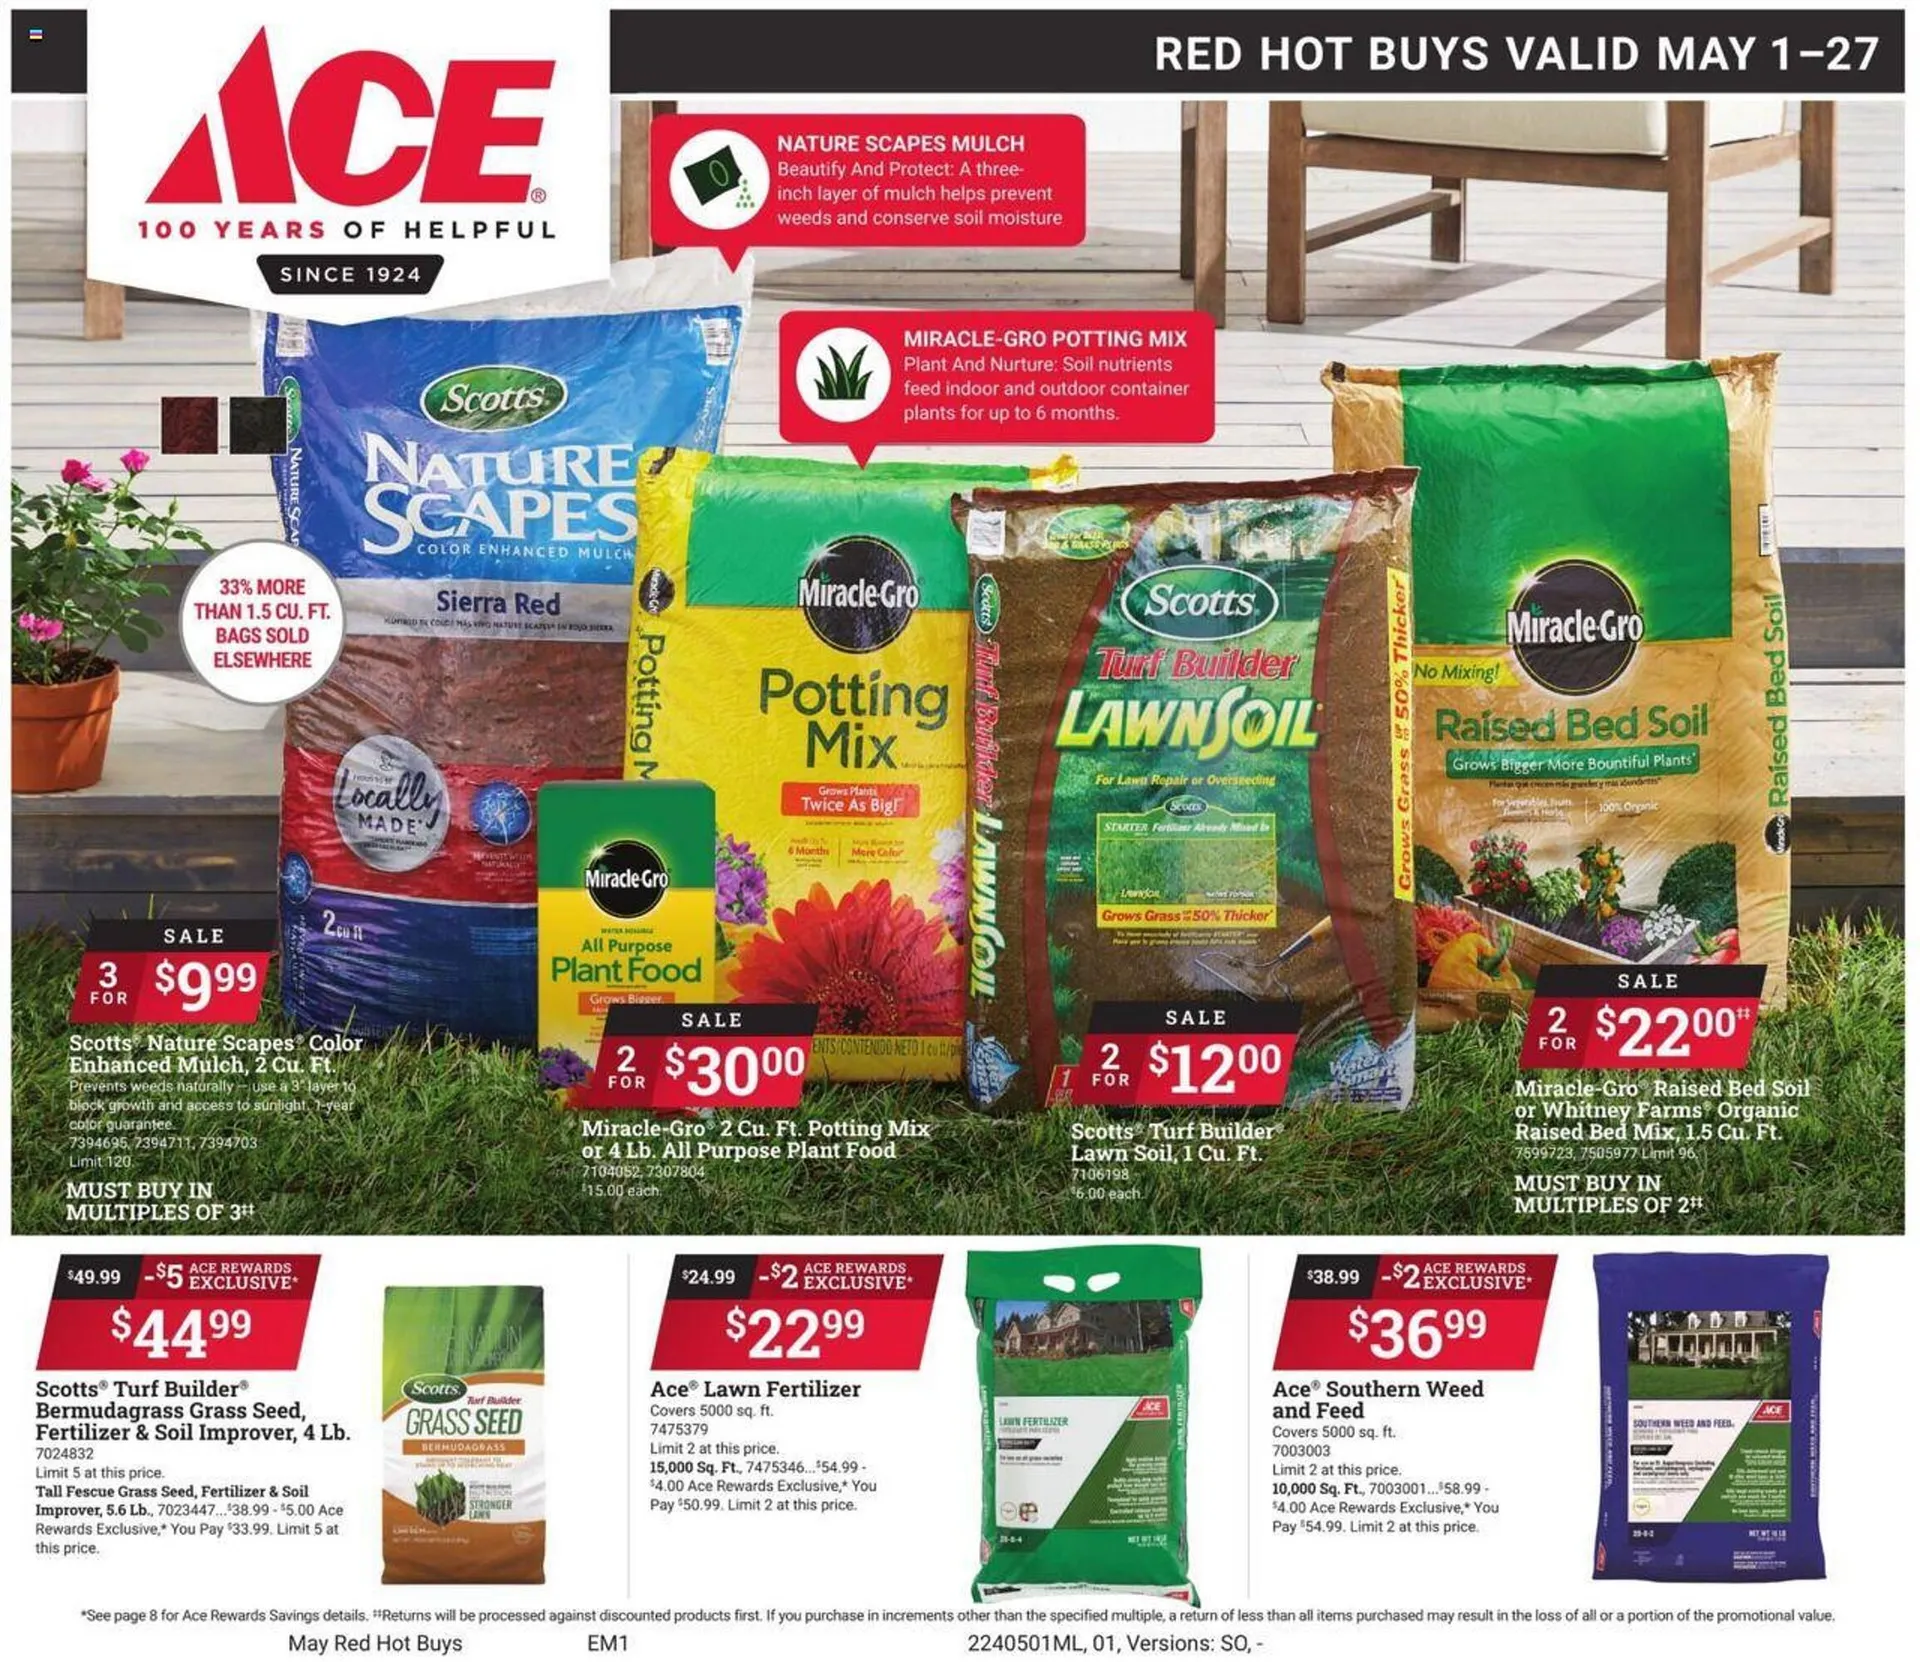 Ace Hardware Weekly Ad - 1